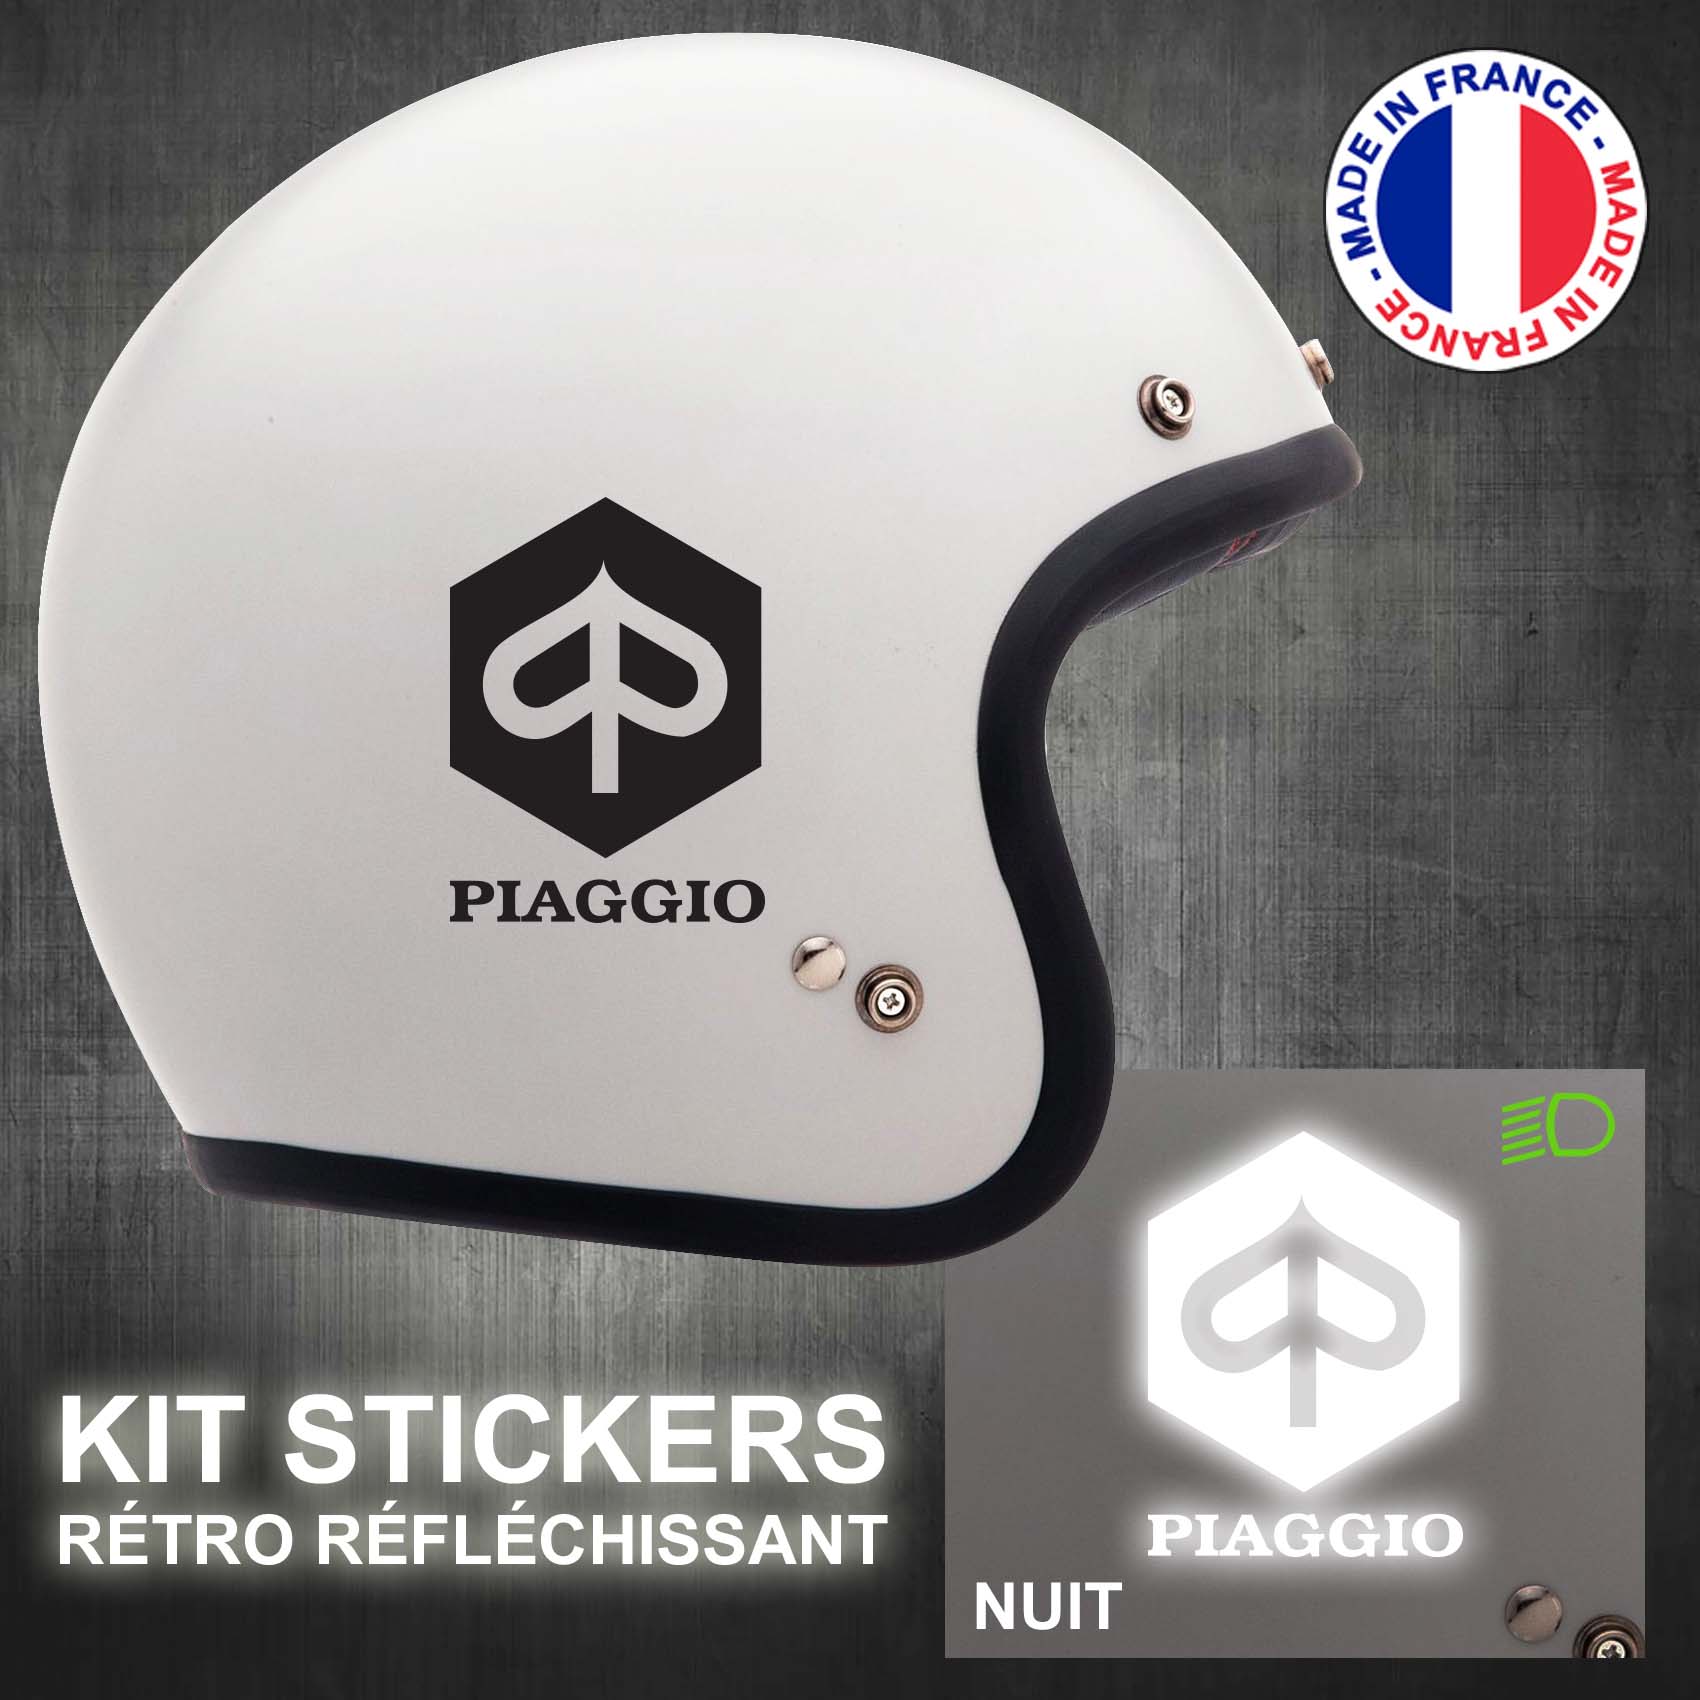 stickers-casque-moto-piaggio-ref1-retro-reflechissant-autocollant-moto-velo-tuning-racing-route-sticker-casques-adhesif-scooter-nuit-securite-decals-personnalise-personnalisable-min